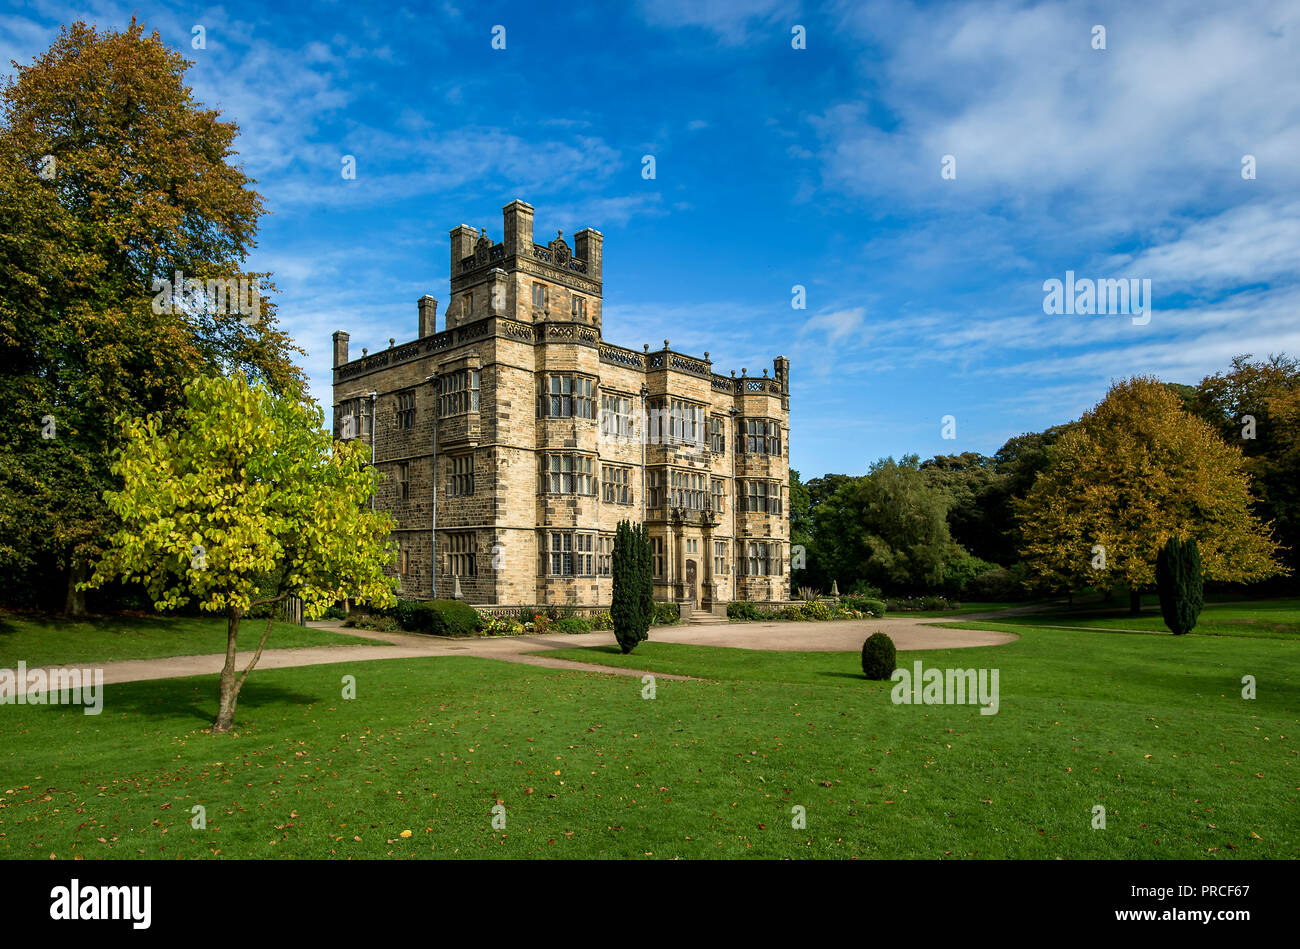 Gawthorpe Hall, a National Trust property in Burnley, Lancashire. Affectionately referred to as the ‘Downton of the North’, Gawthorpe Hall was redesig Stock Photo